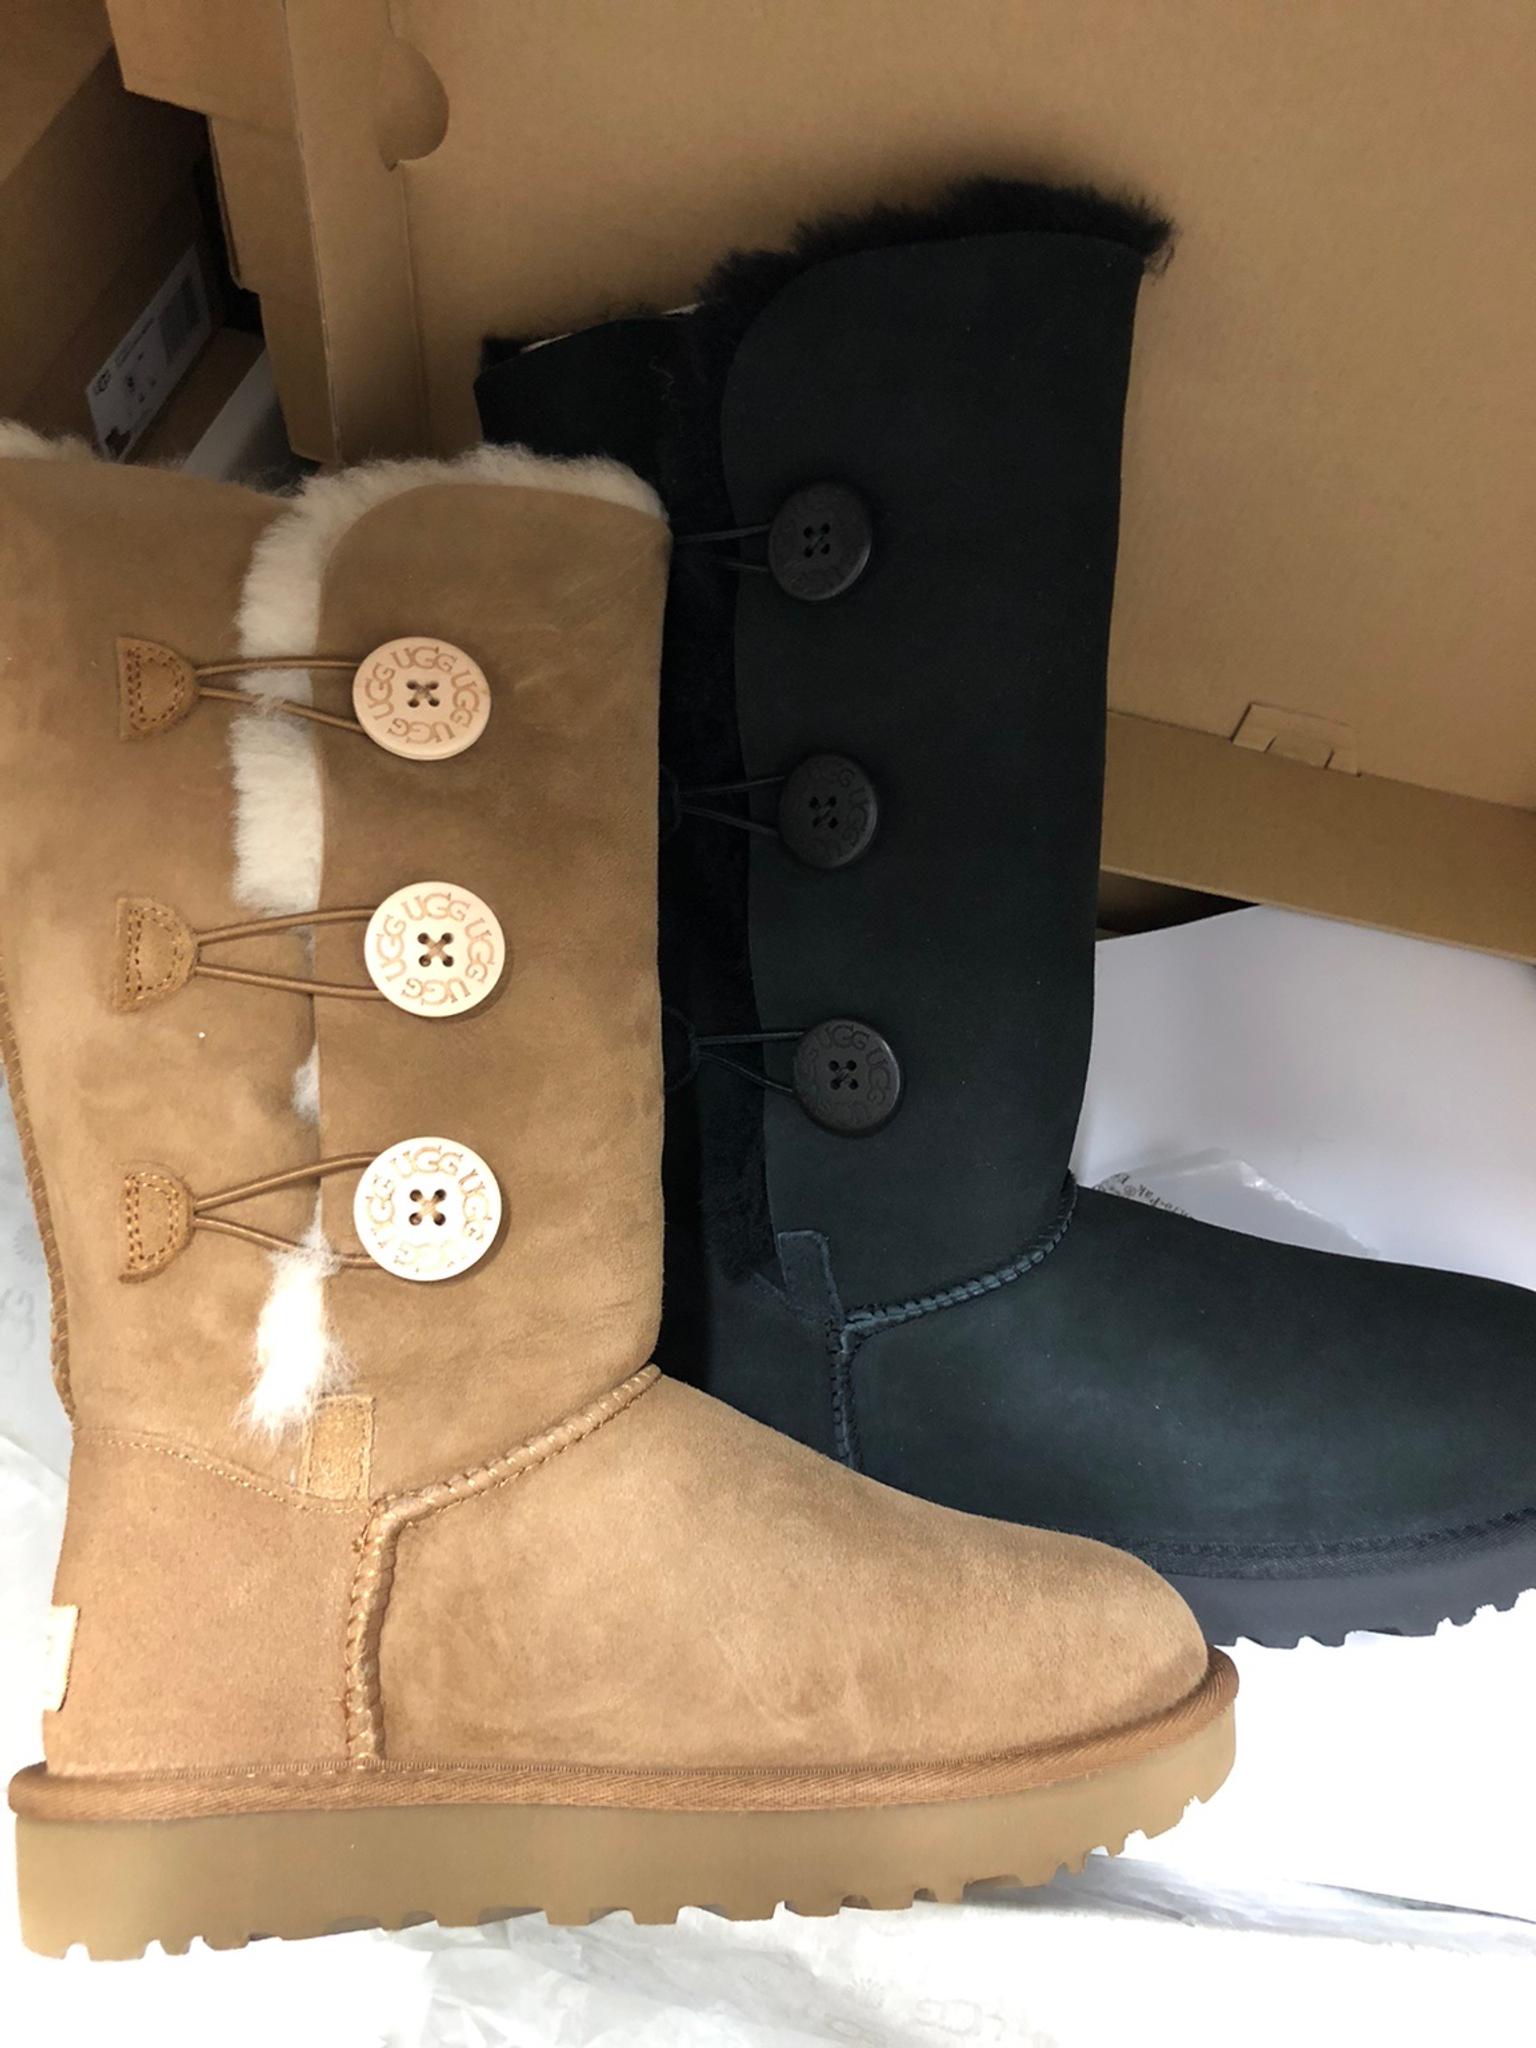 get together scream Responsible person Women's UGG Bailey Button Triplet II in W12 Ealing for £180.00 for sale |  Shpock